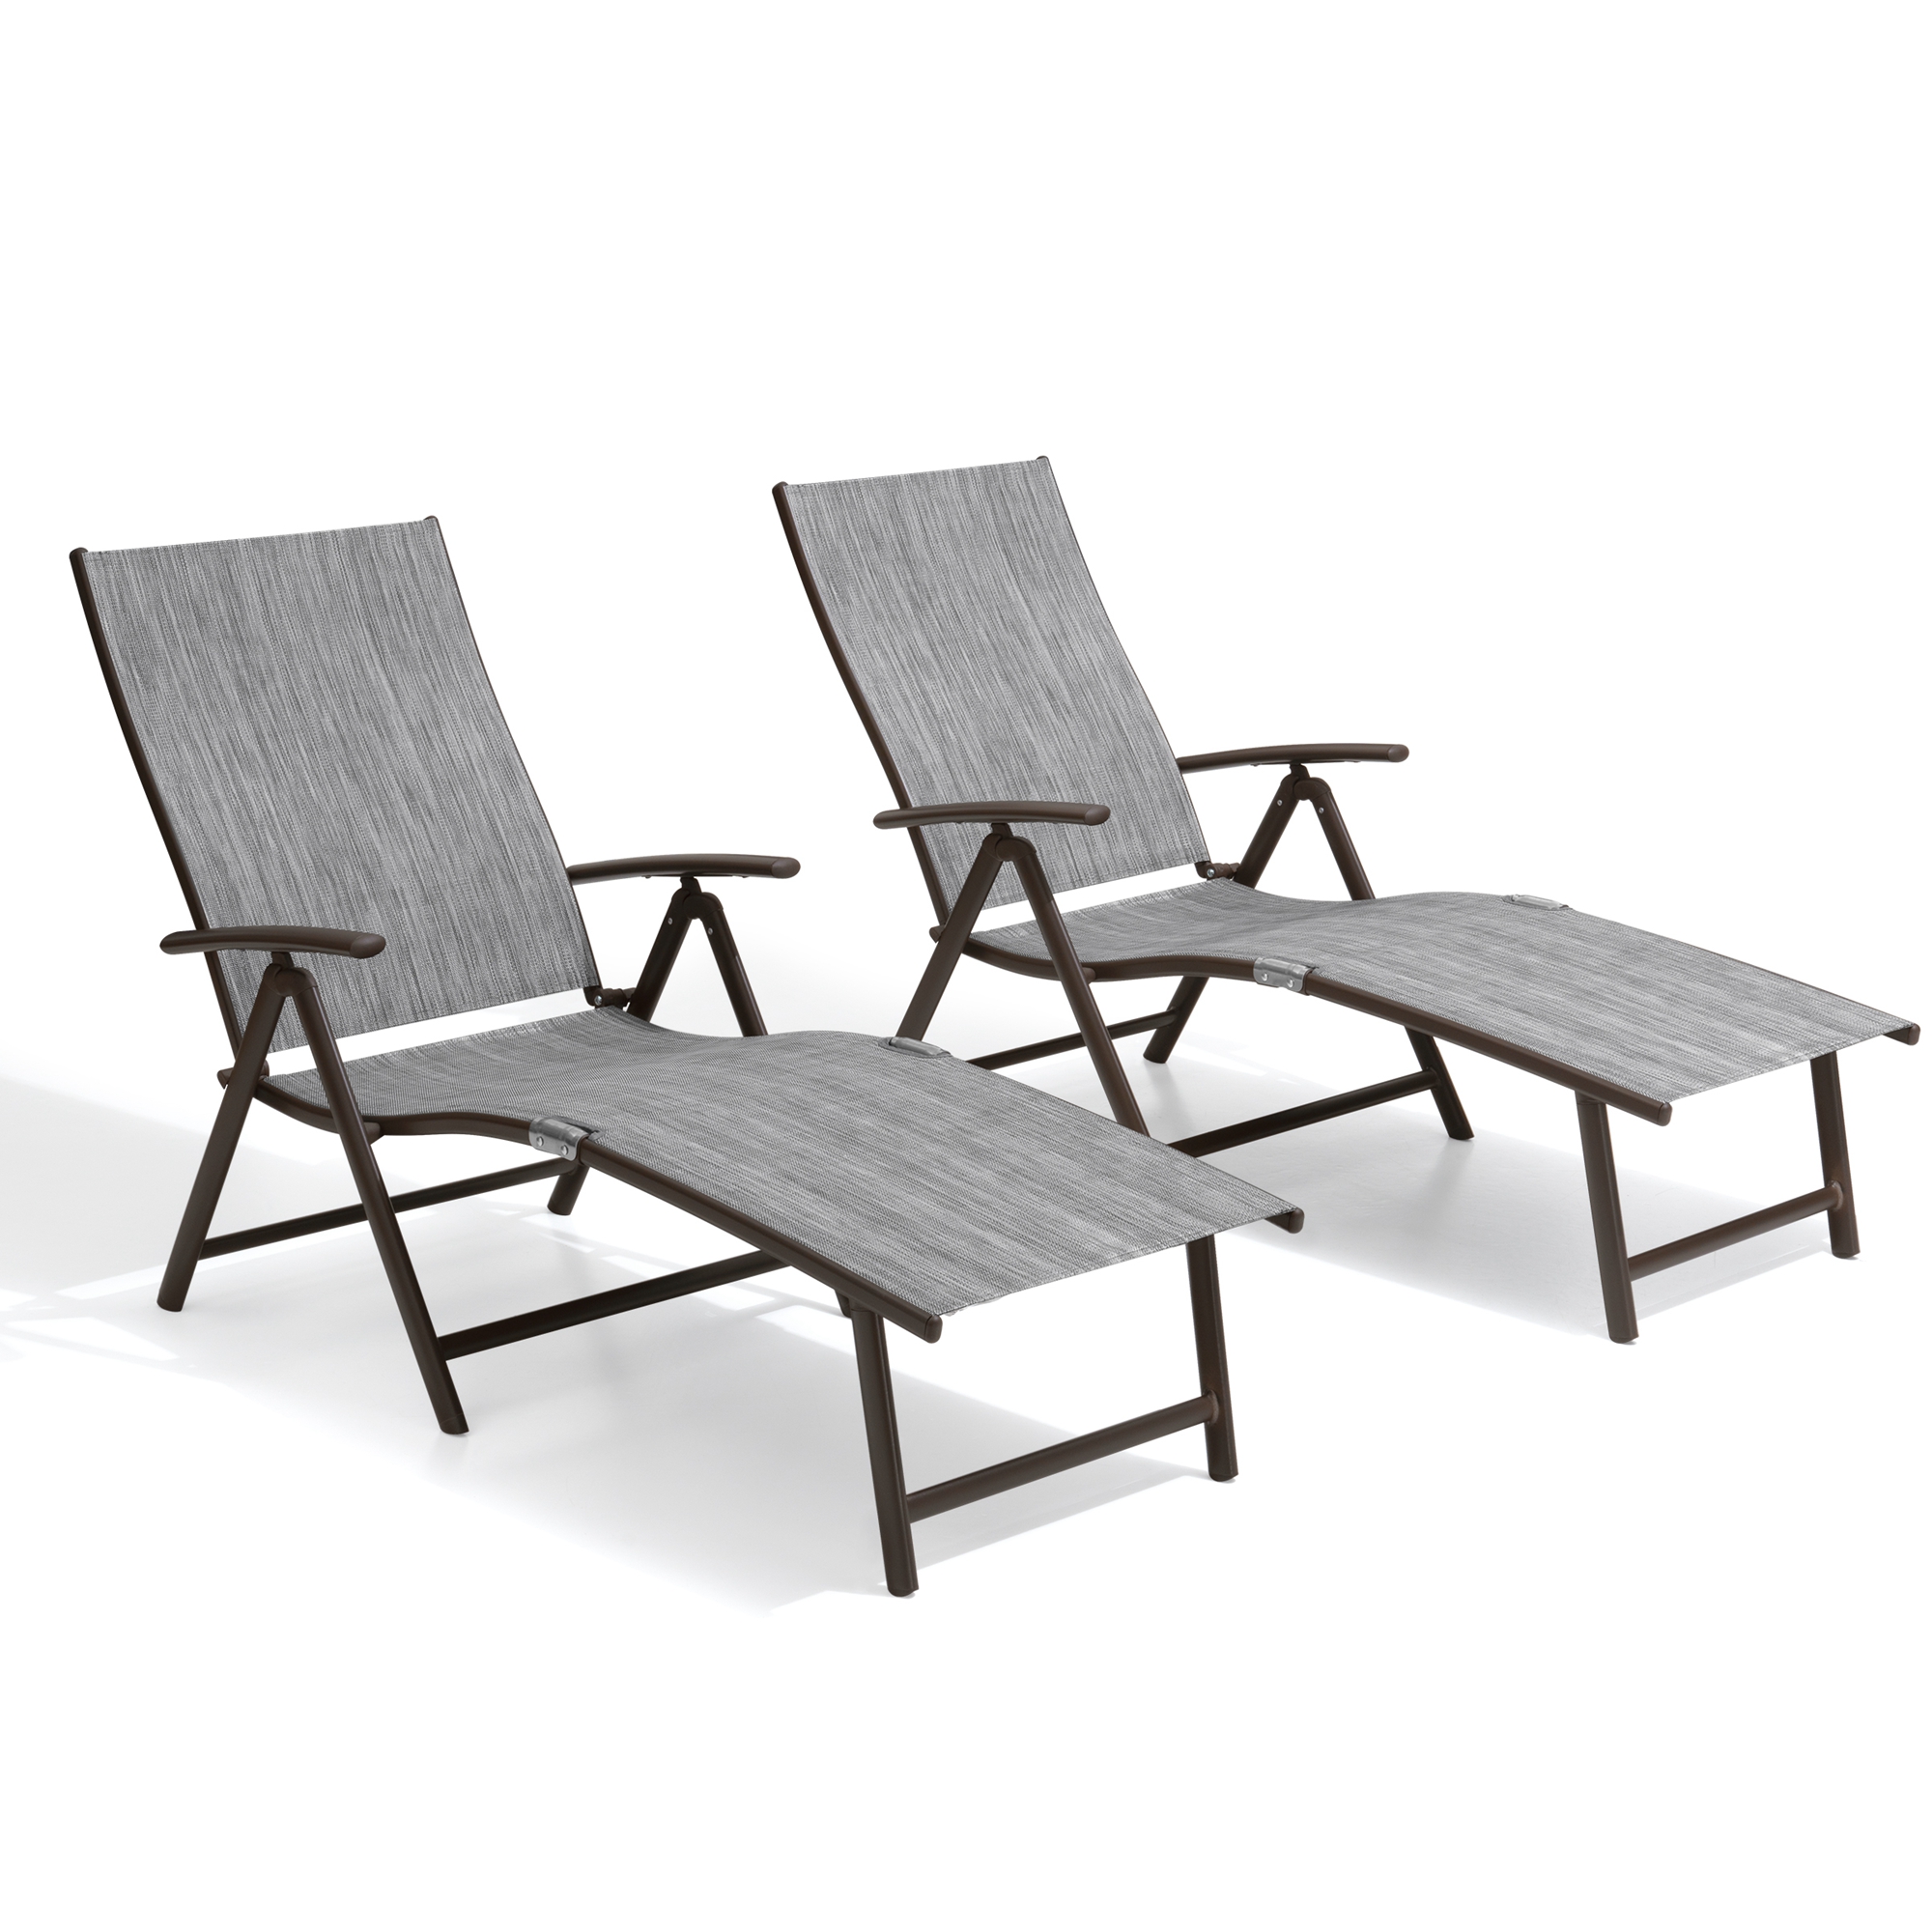 Pellebant Set of 2 Outdoor Chaise Lounge Aluminum Patio Folding Chairs,Gray - image 1 of 7